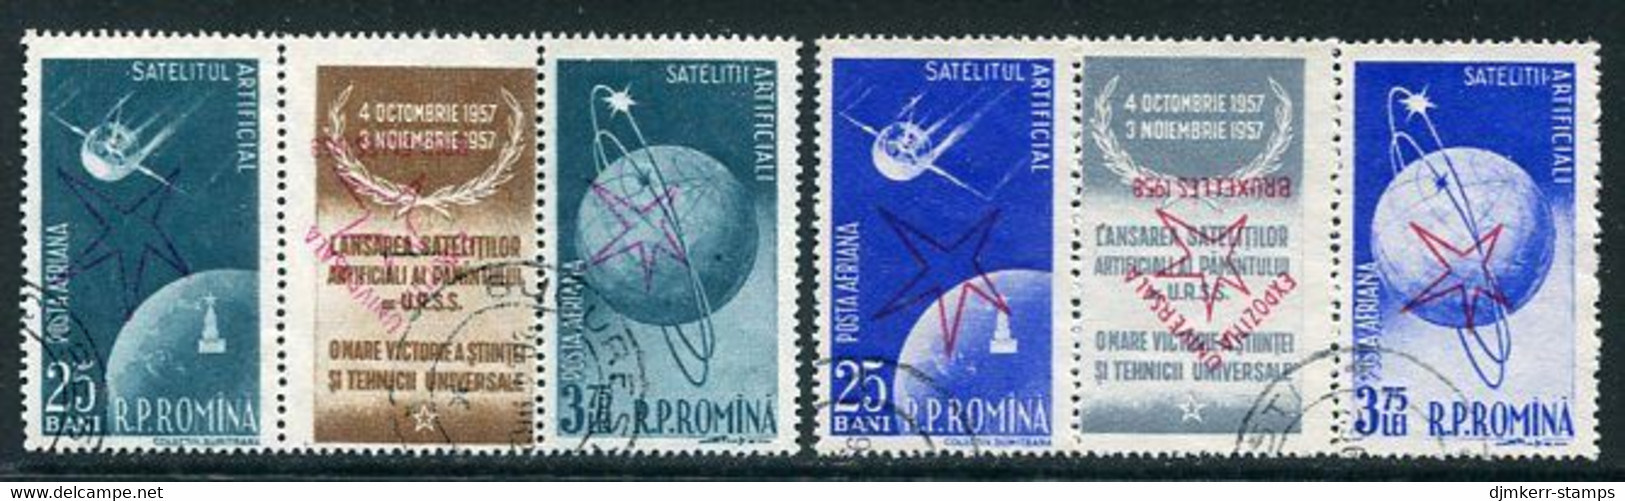 ROMANIA 1958 Brussels Exhibition Inverted Overprint Strips Used.  Michel 1717-20 K - Usati